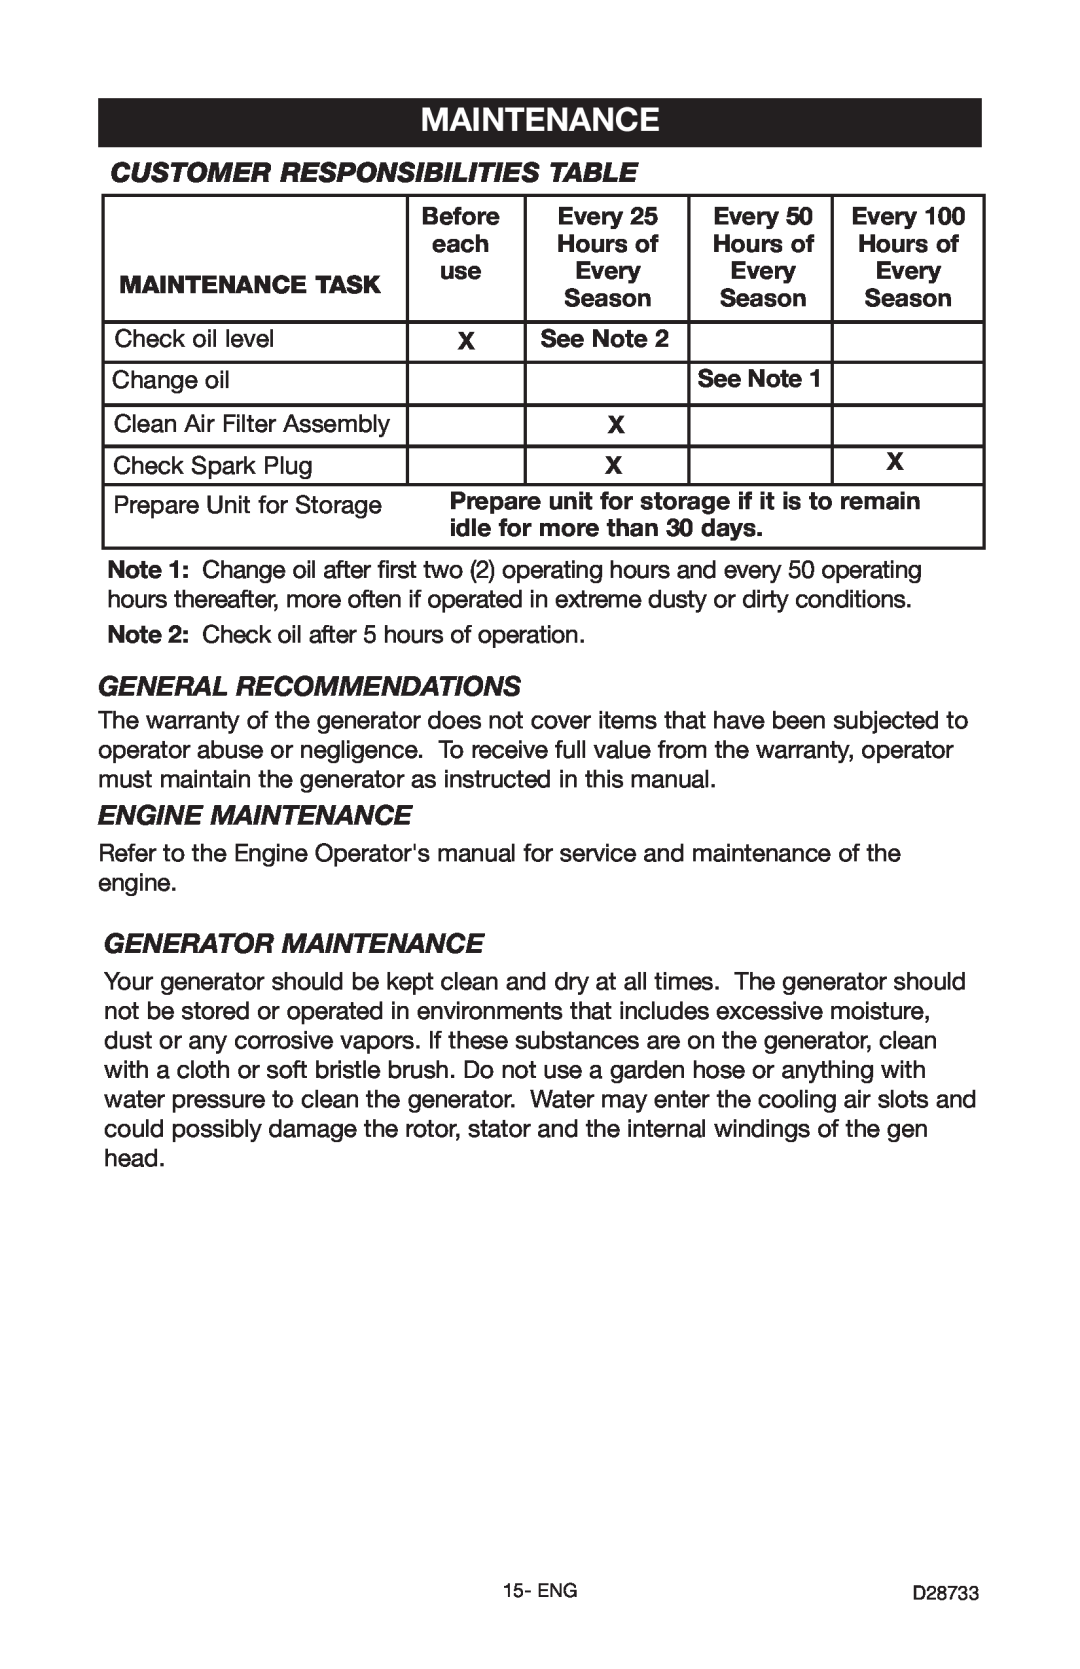 Porter-Cable D28733-034-0, PGN350 Customer Responsibilities Table, General Recommendations, Engine Maintenance 